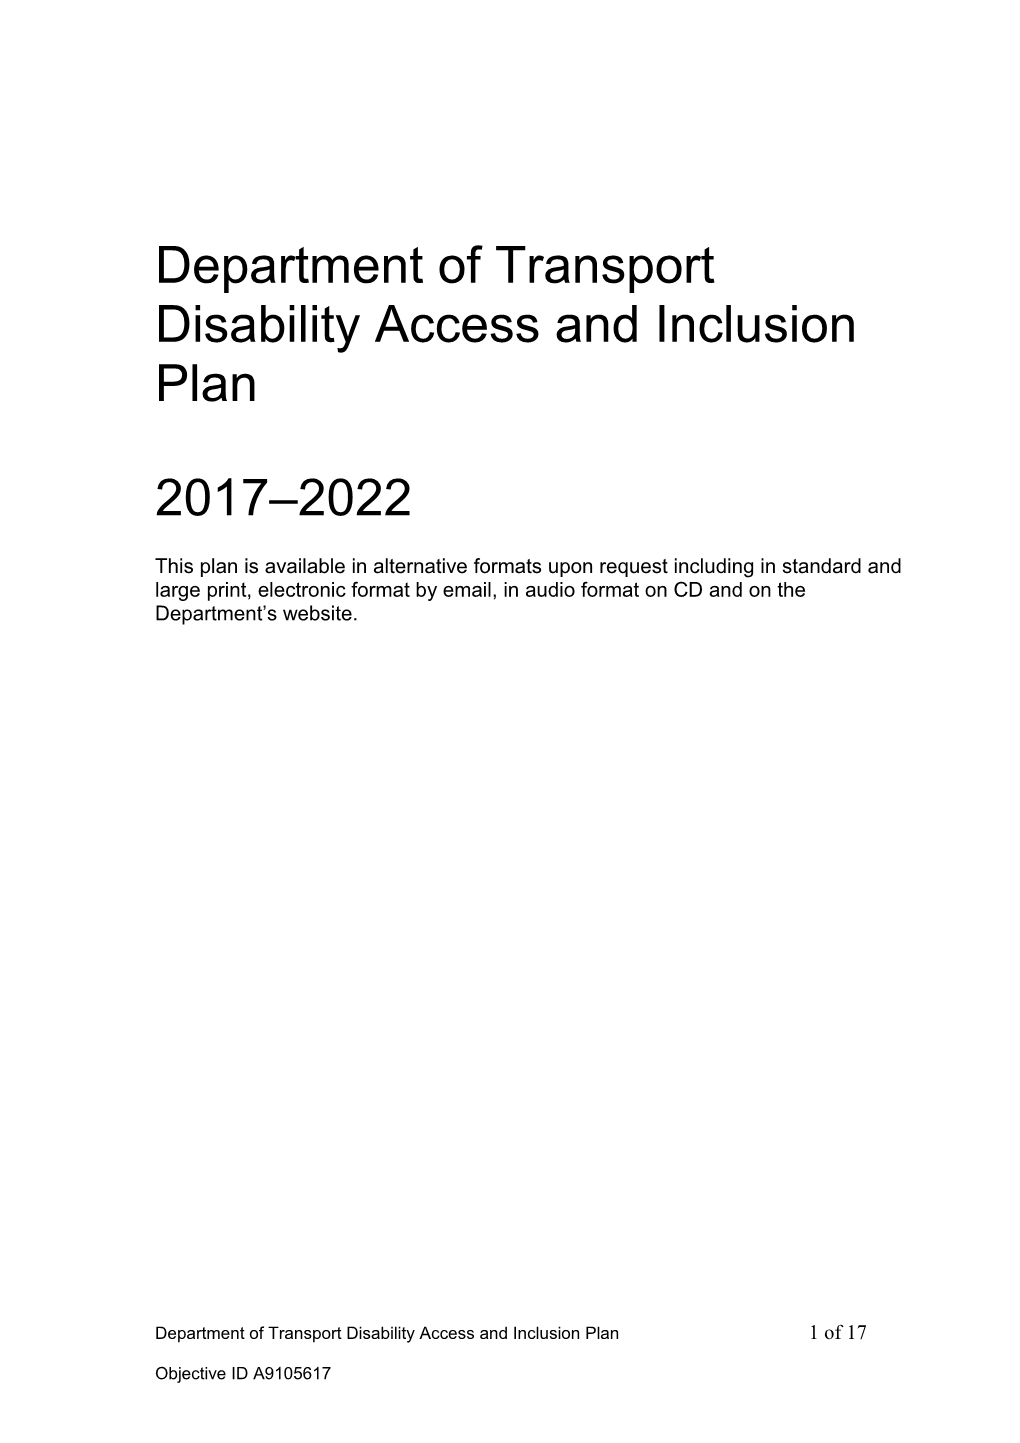 Department of Transport Disability Access and Inclusion Plan 2017-2022